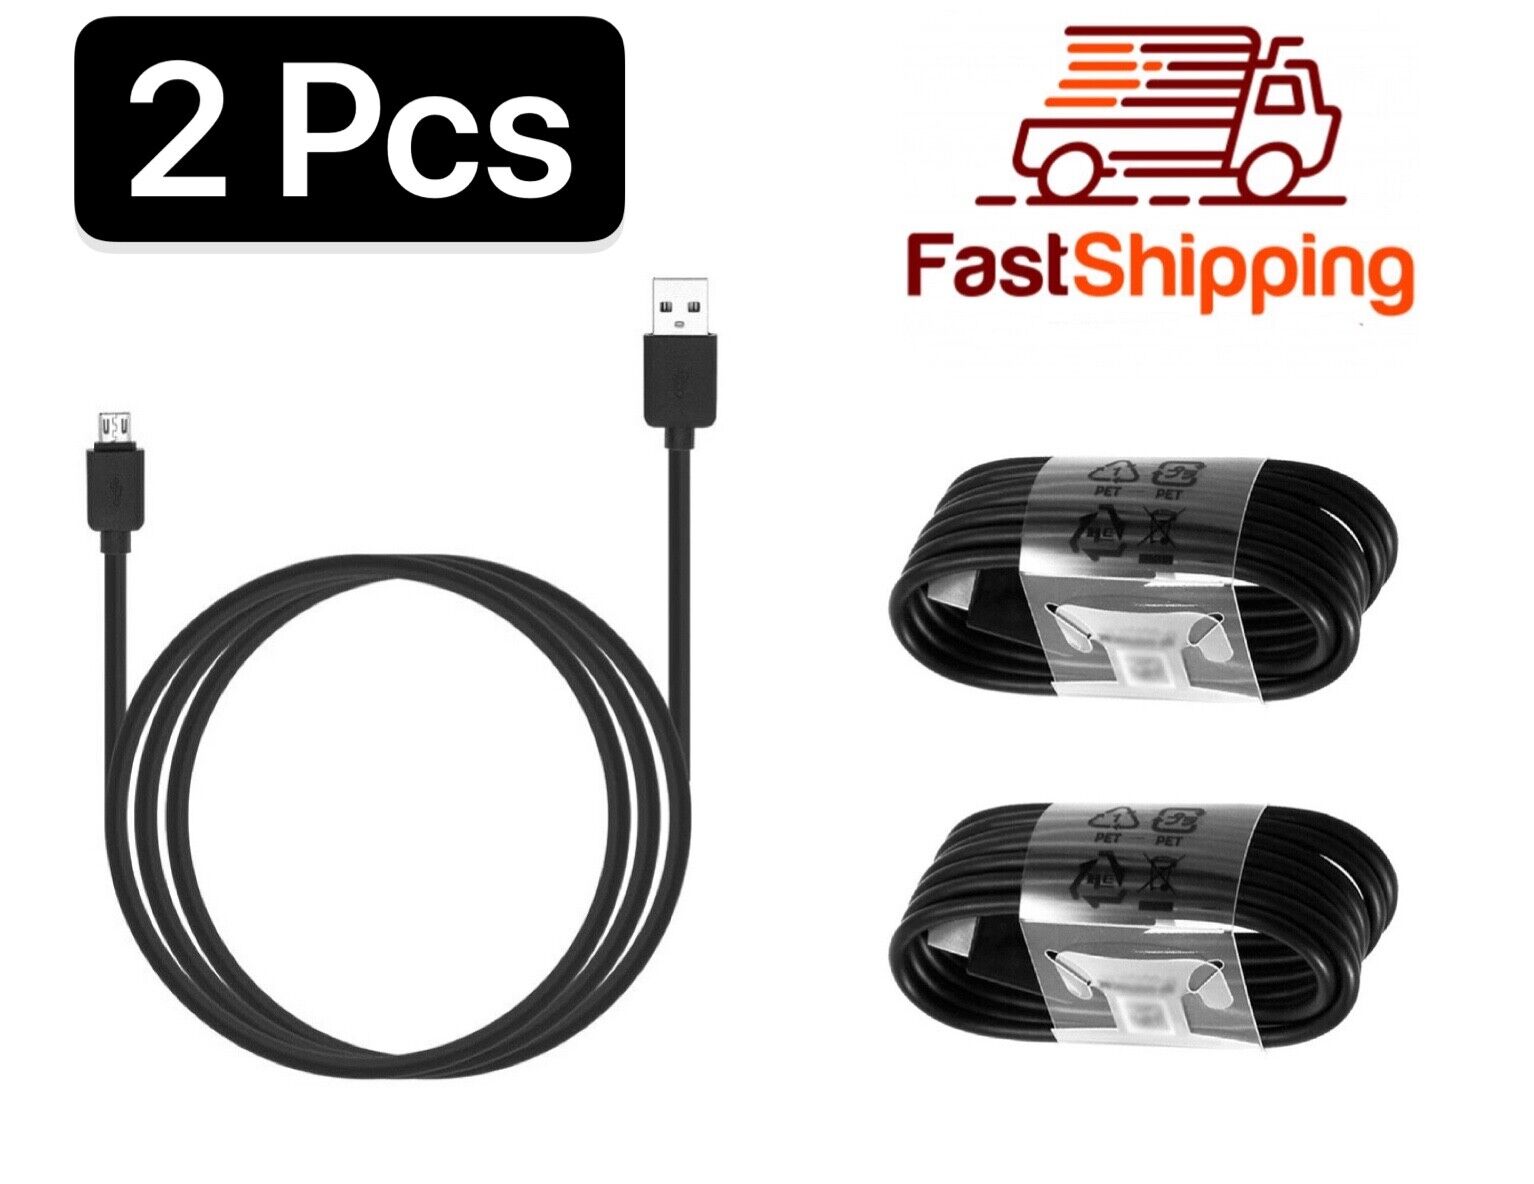 2 Pcs Micro USB Data Cable Cord Charger for Amazon Kindle Fire 2 HD 7 Tablet Bk